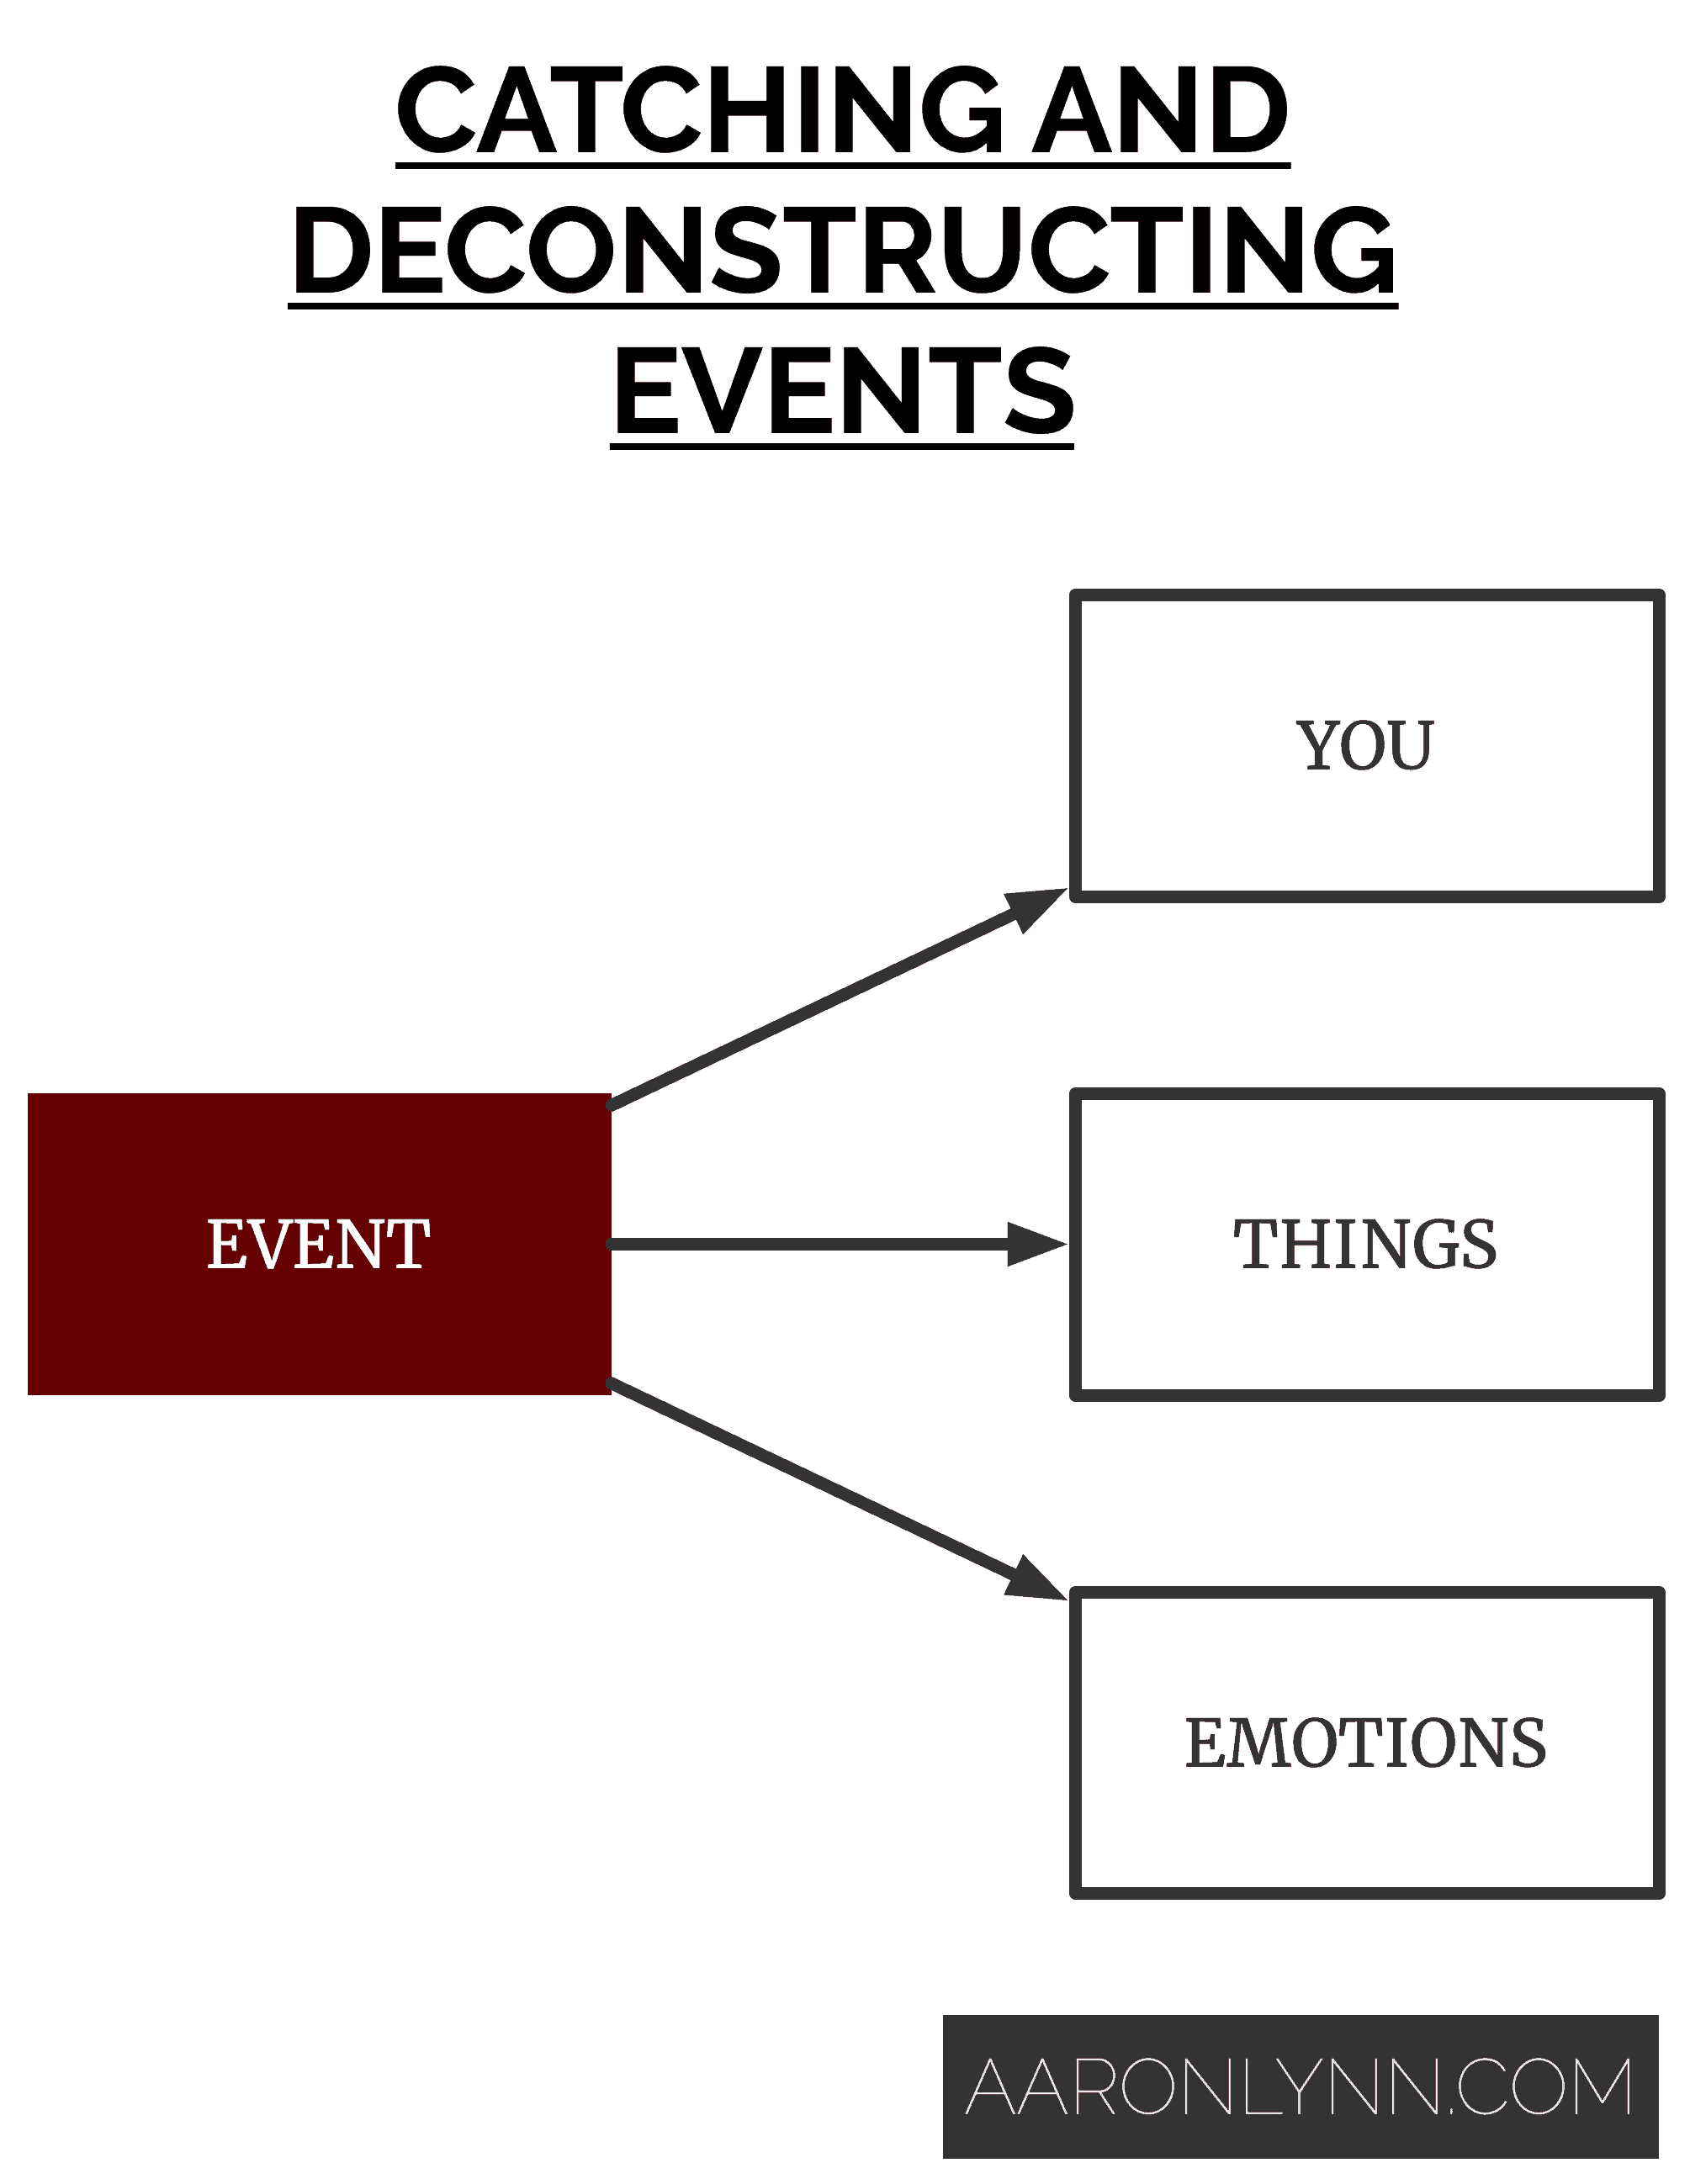 Catching and Deconstructing Events